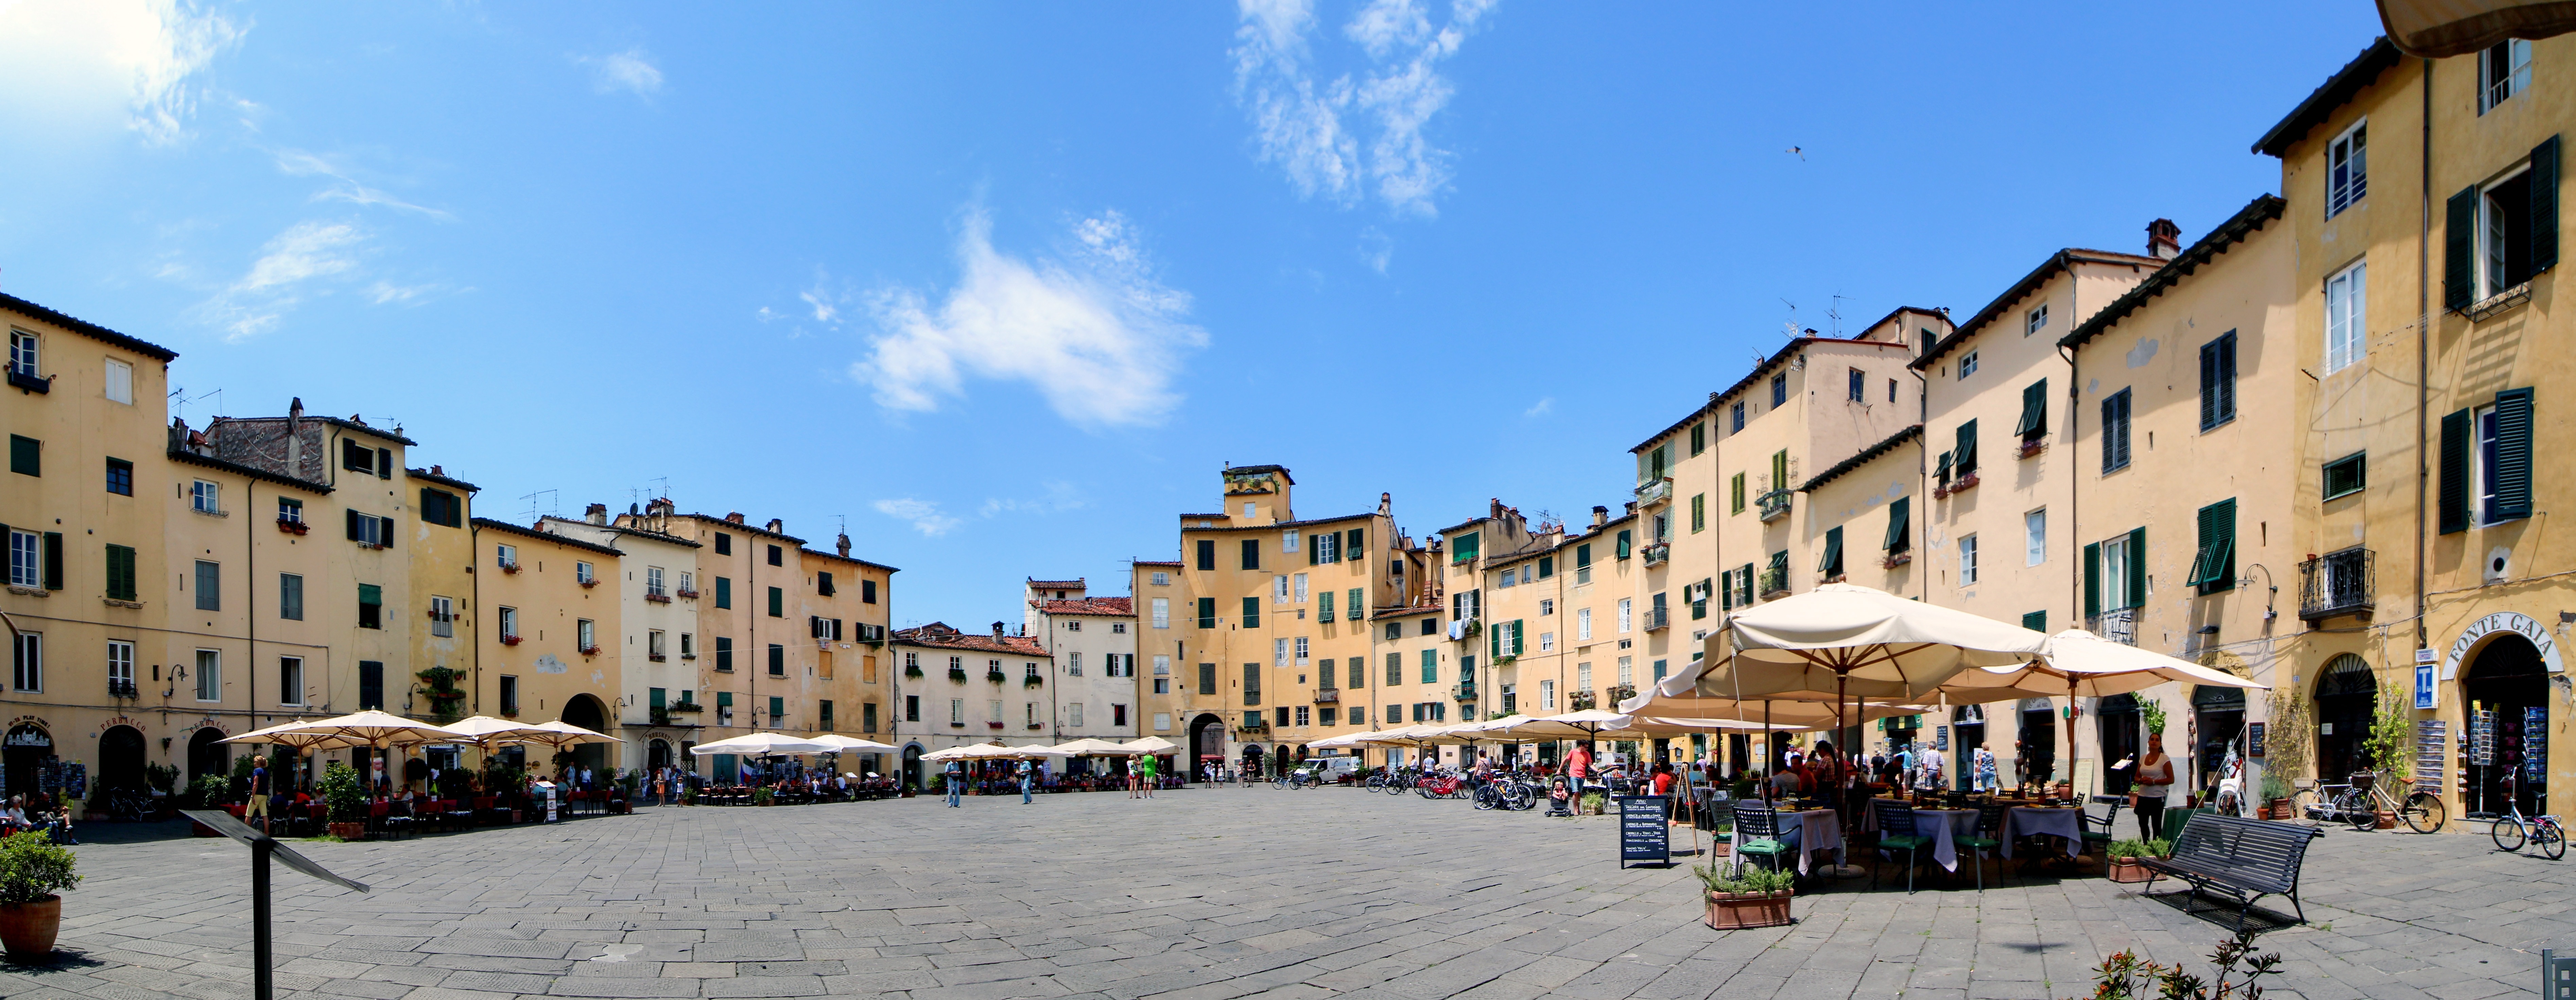 Lucca, Panorama, Tuscany, Italy, Holiday, building exterior, city